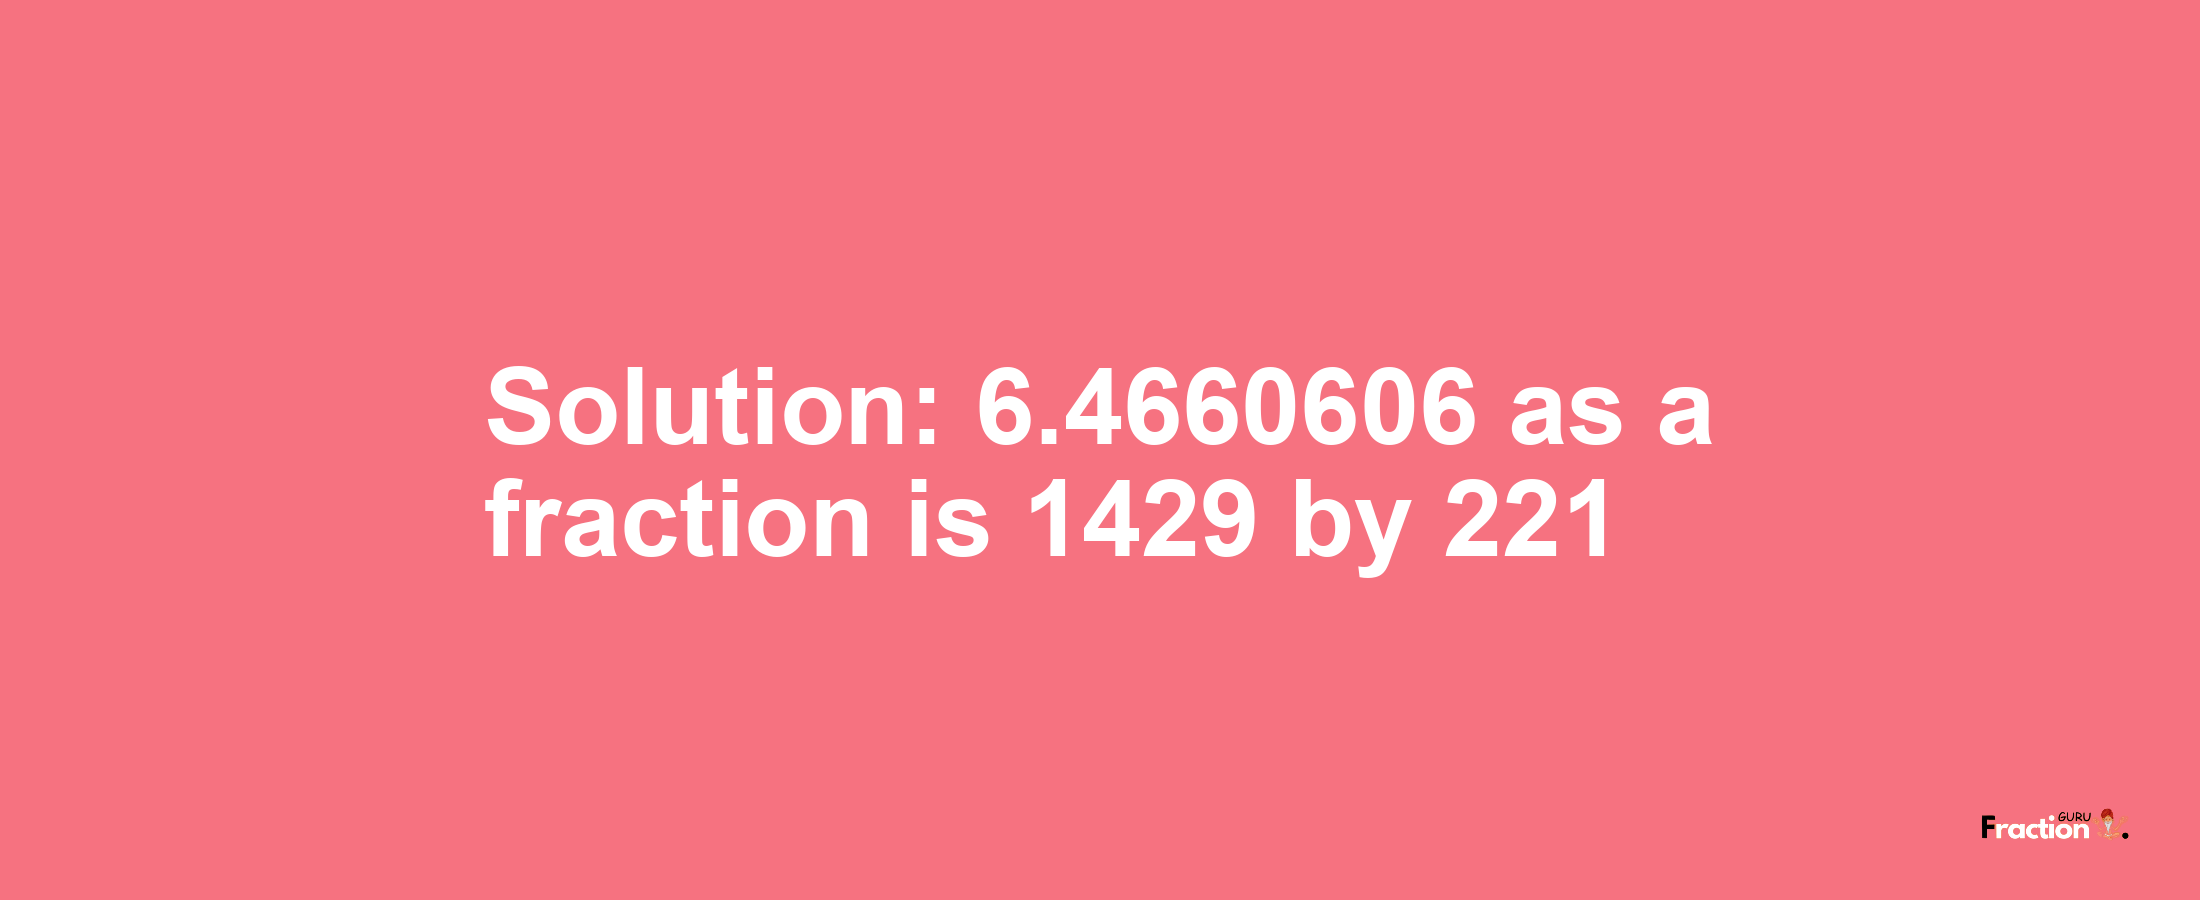 Solution:6.4660606 as a fraction is 1429/221